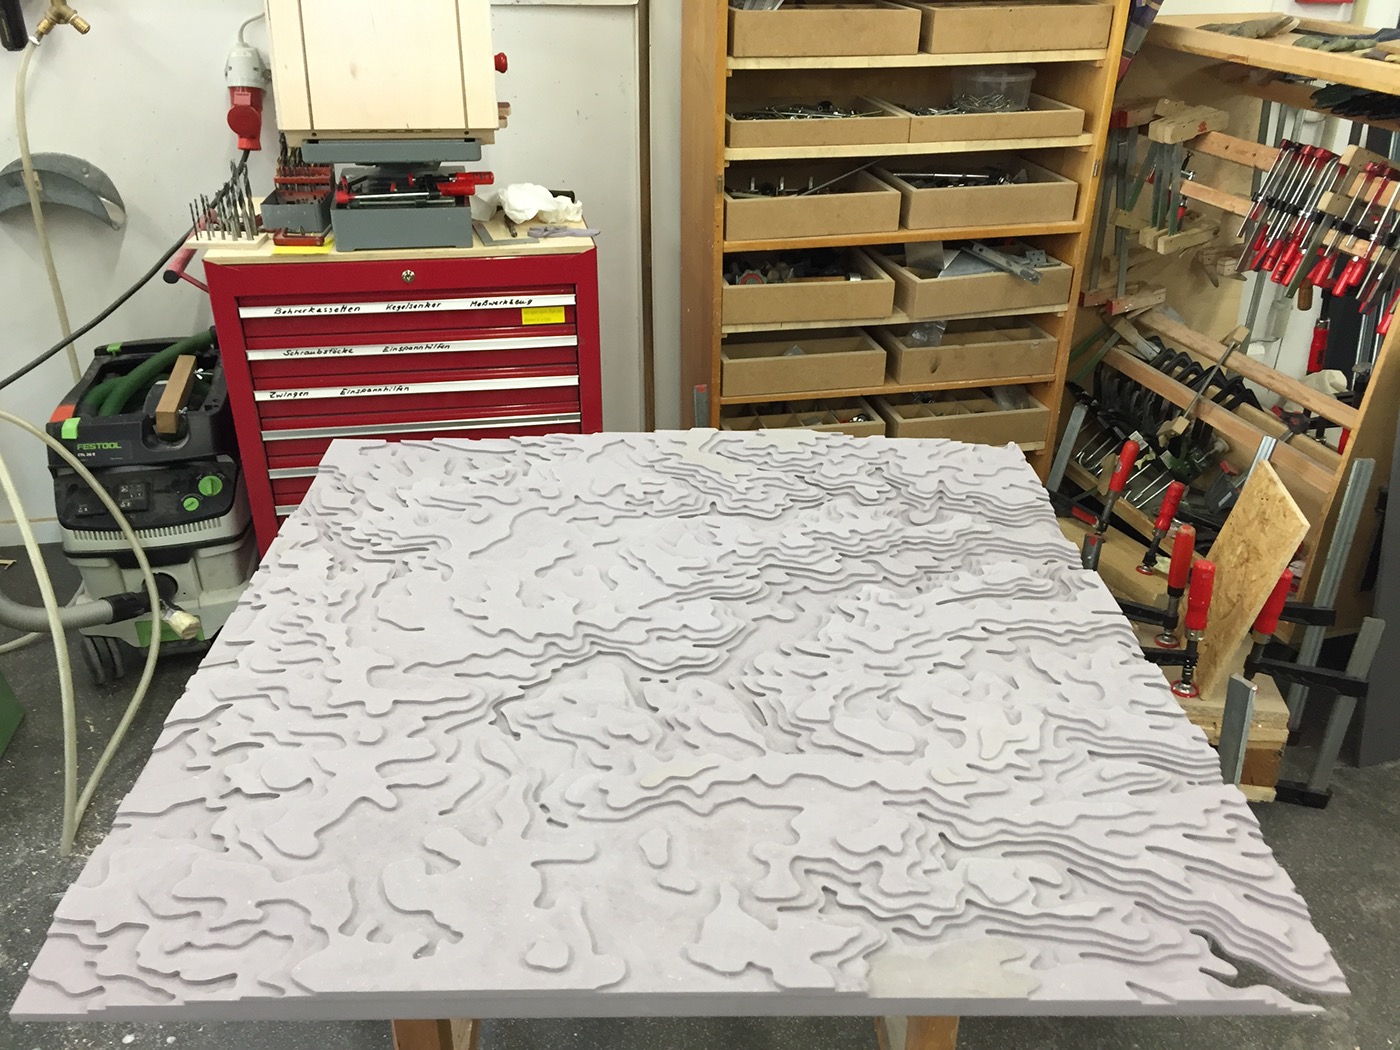 cartography Topographic topography map Mapping cnc milling